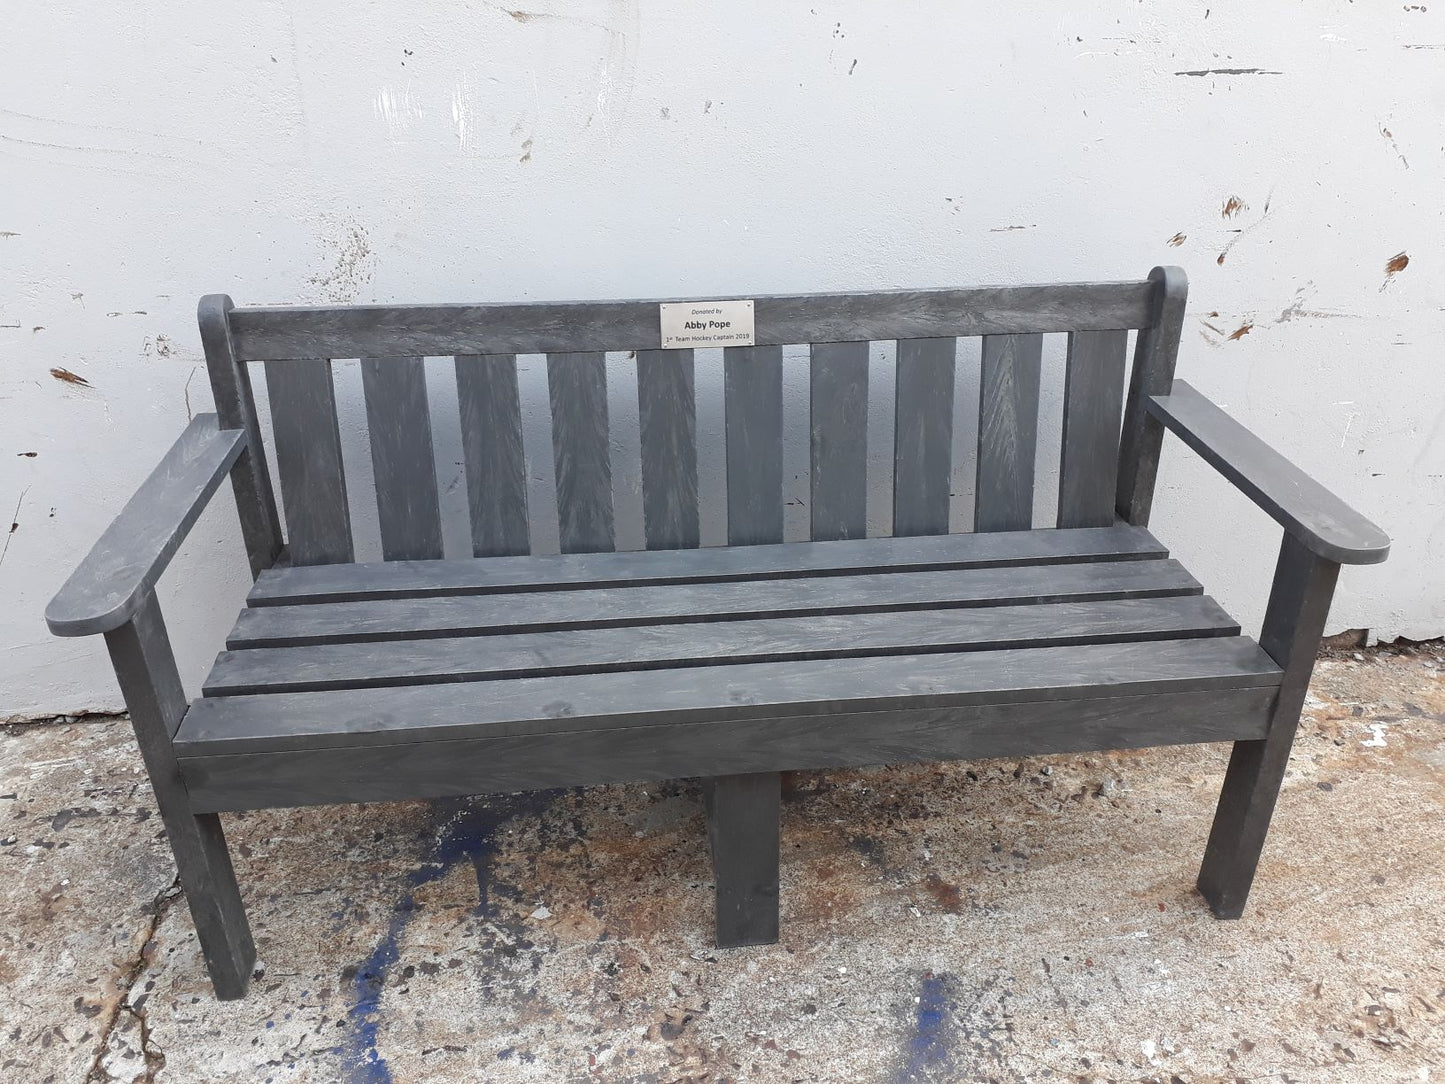 THE RECYCLED PLASTIC "LADY KAY" BENCH